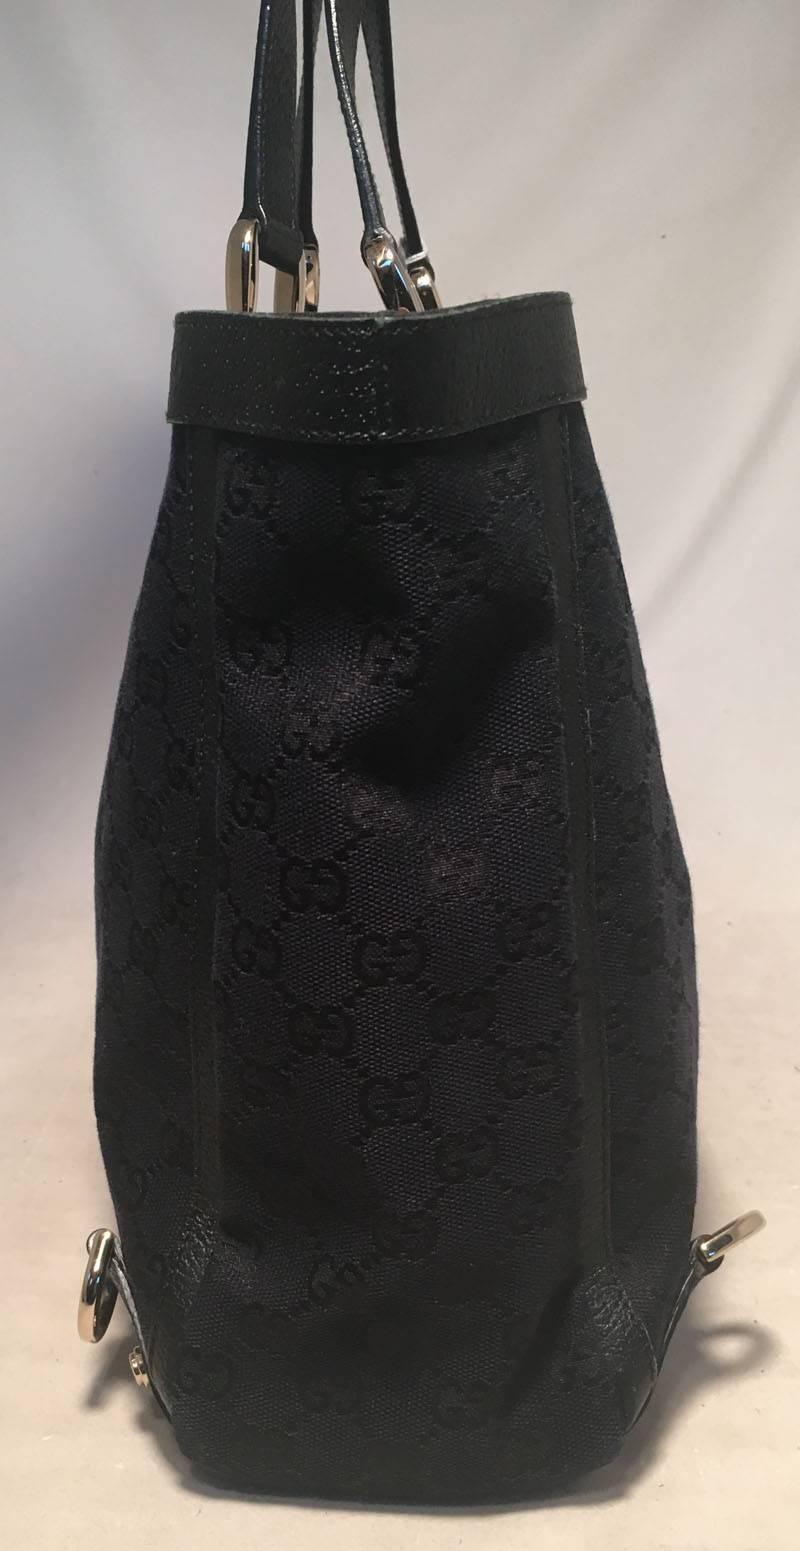 GORGEOUS Gucci Black monogram canvas abbey tote in very good condition.  Black monogram canvas exterior trimmed with black leather and gold hardware.  Top snap closure opens to a black nylon lined interior that holds 1 zipped and 1 slit side